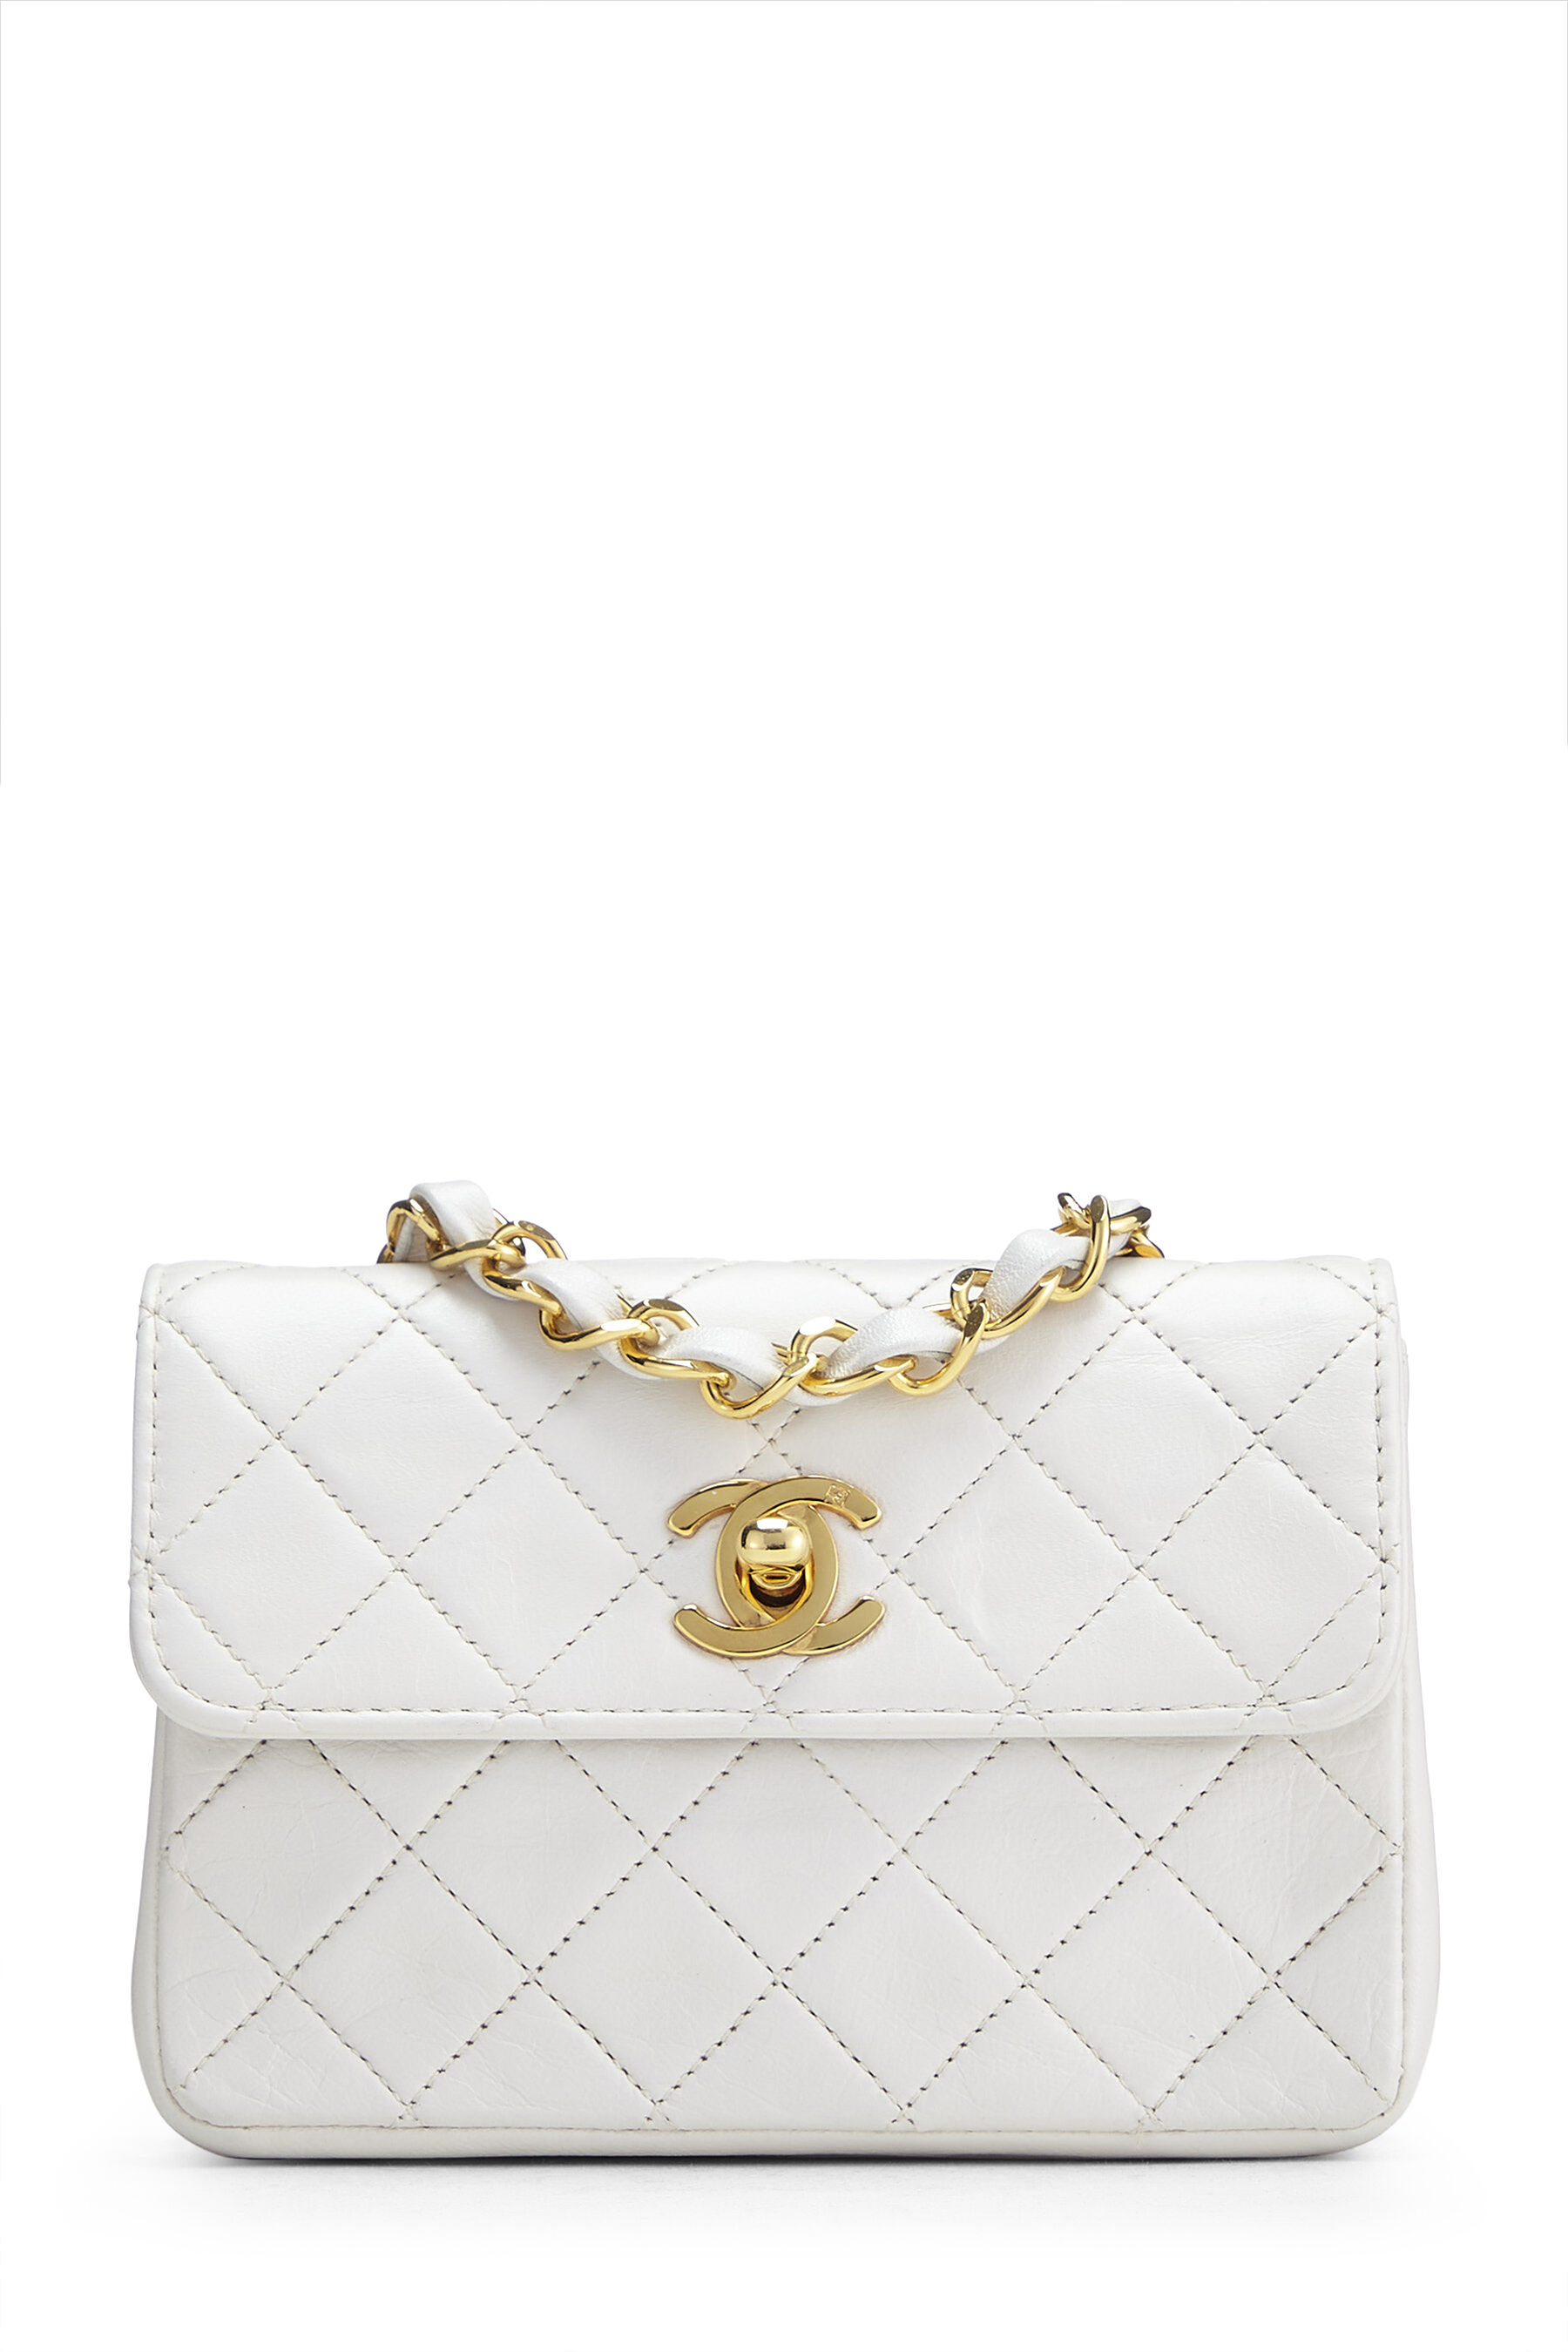 Chanel White Quilted Lambskin Half Flap Micro